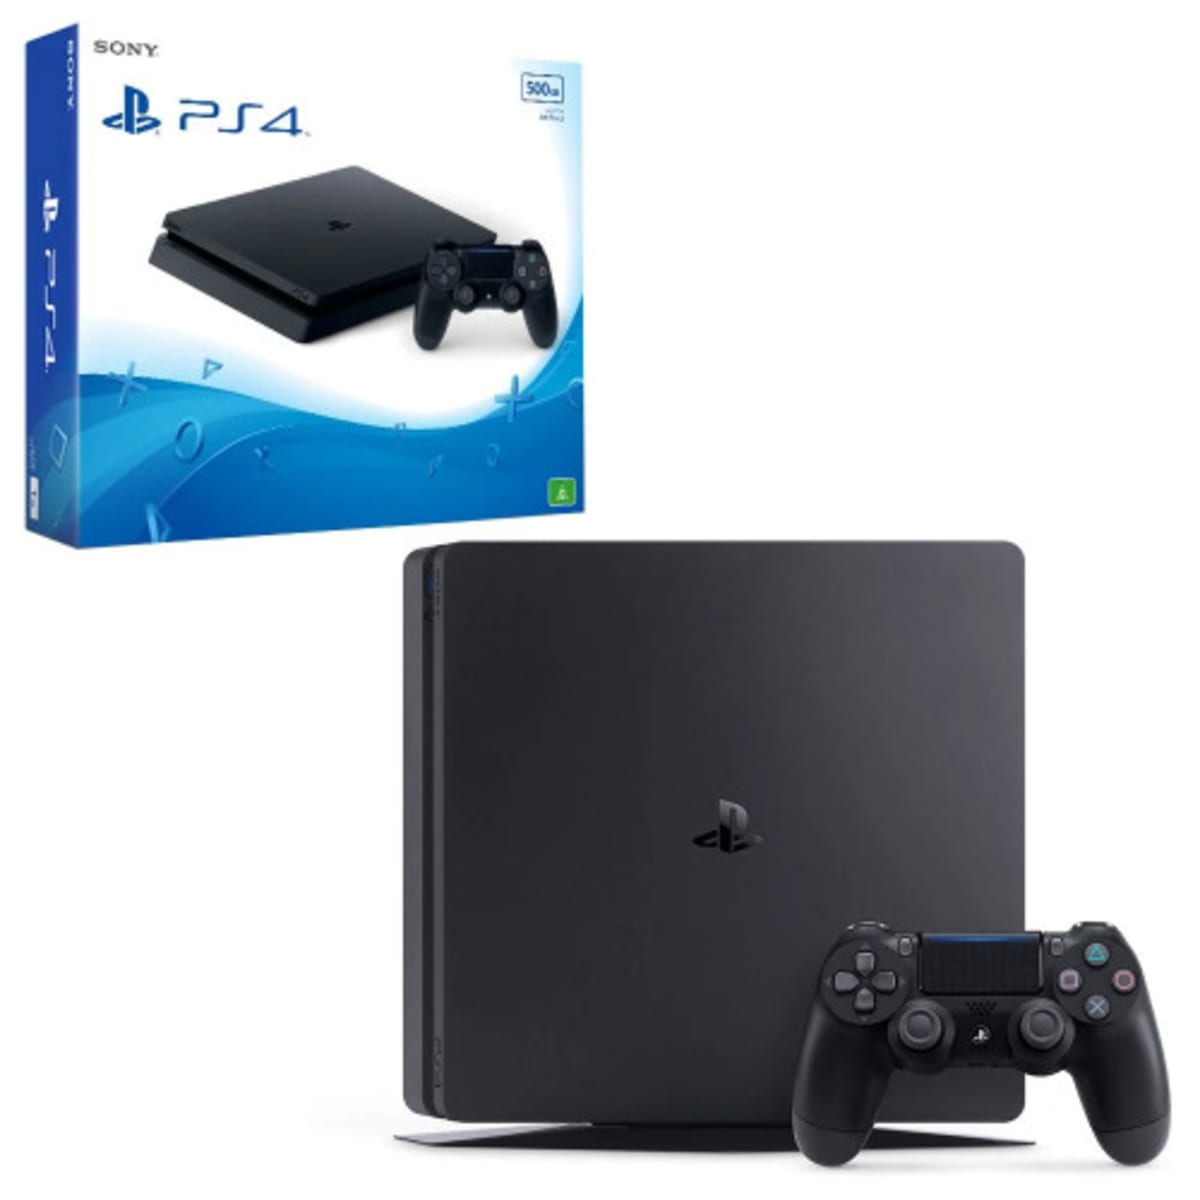 Console PlayStation 4 Slim 500GB - Consoles PS4 - Playstation 4